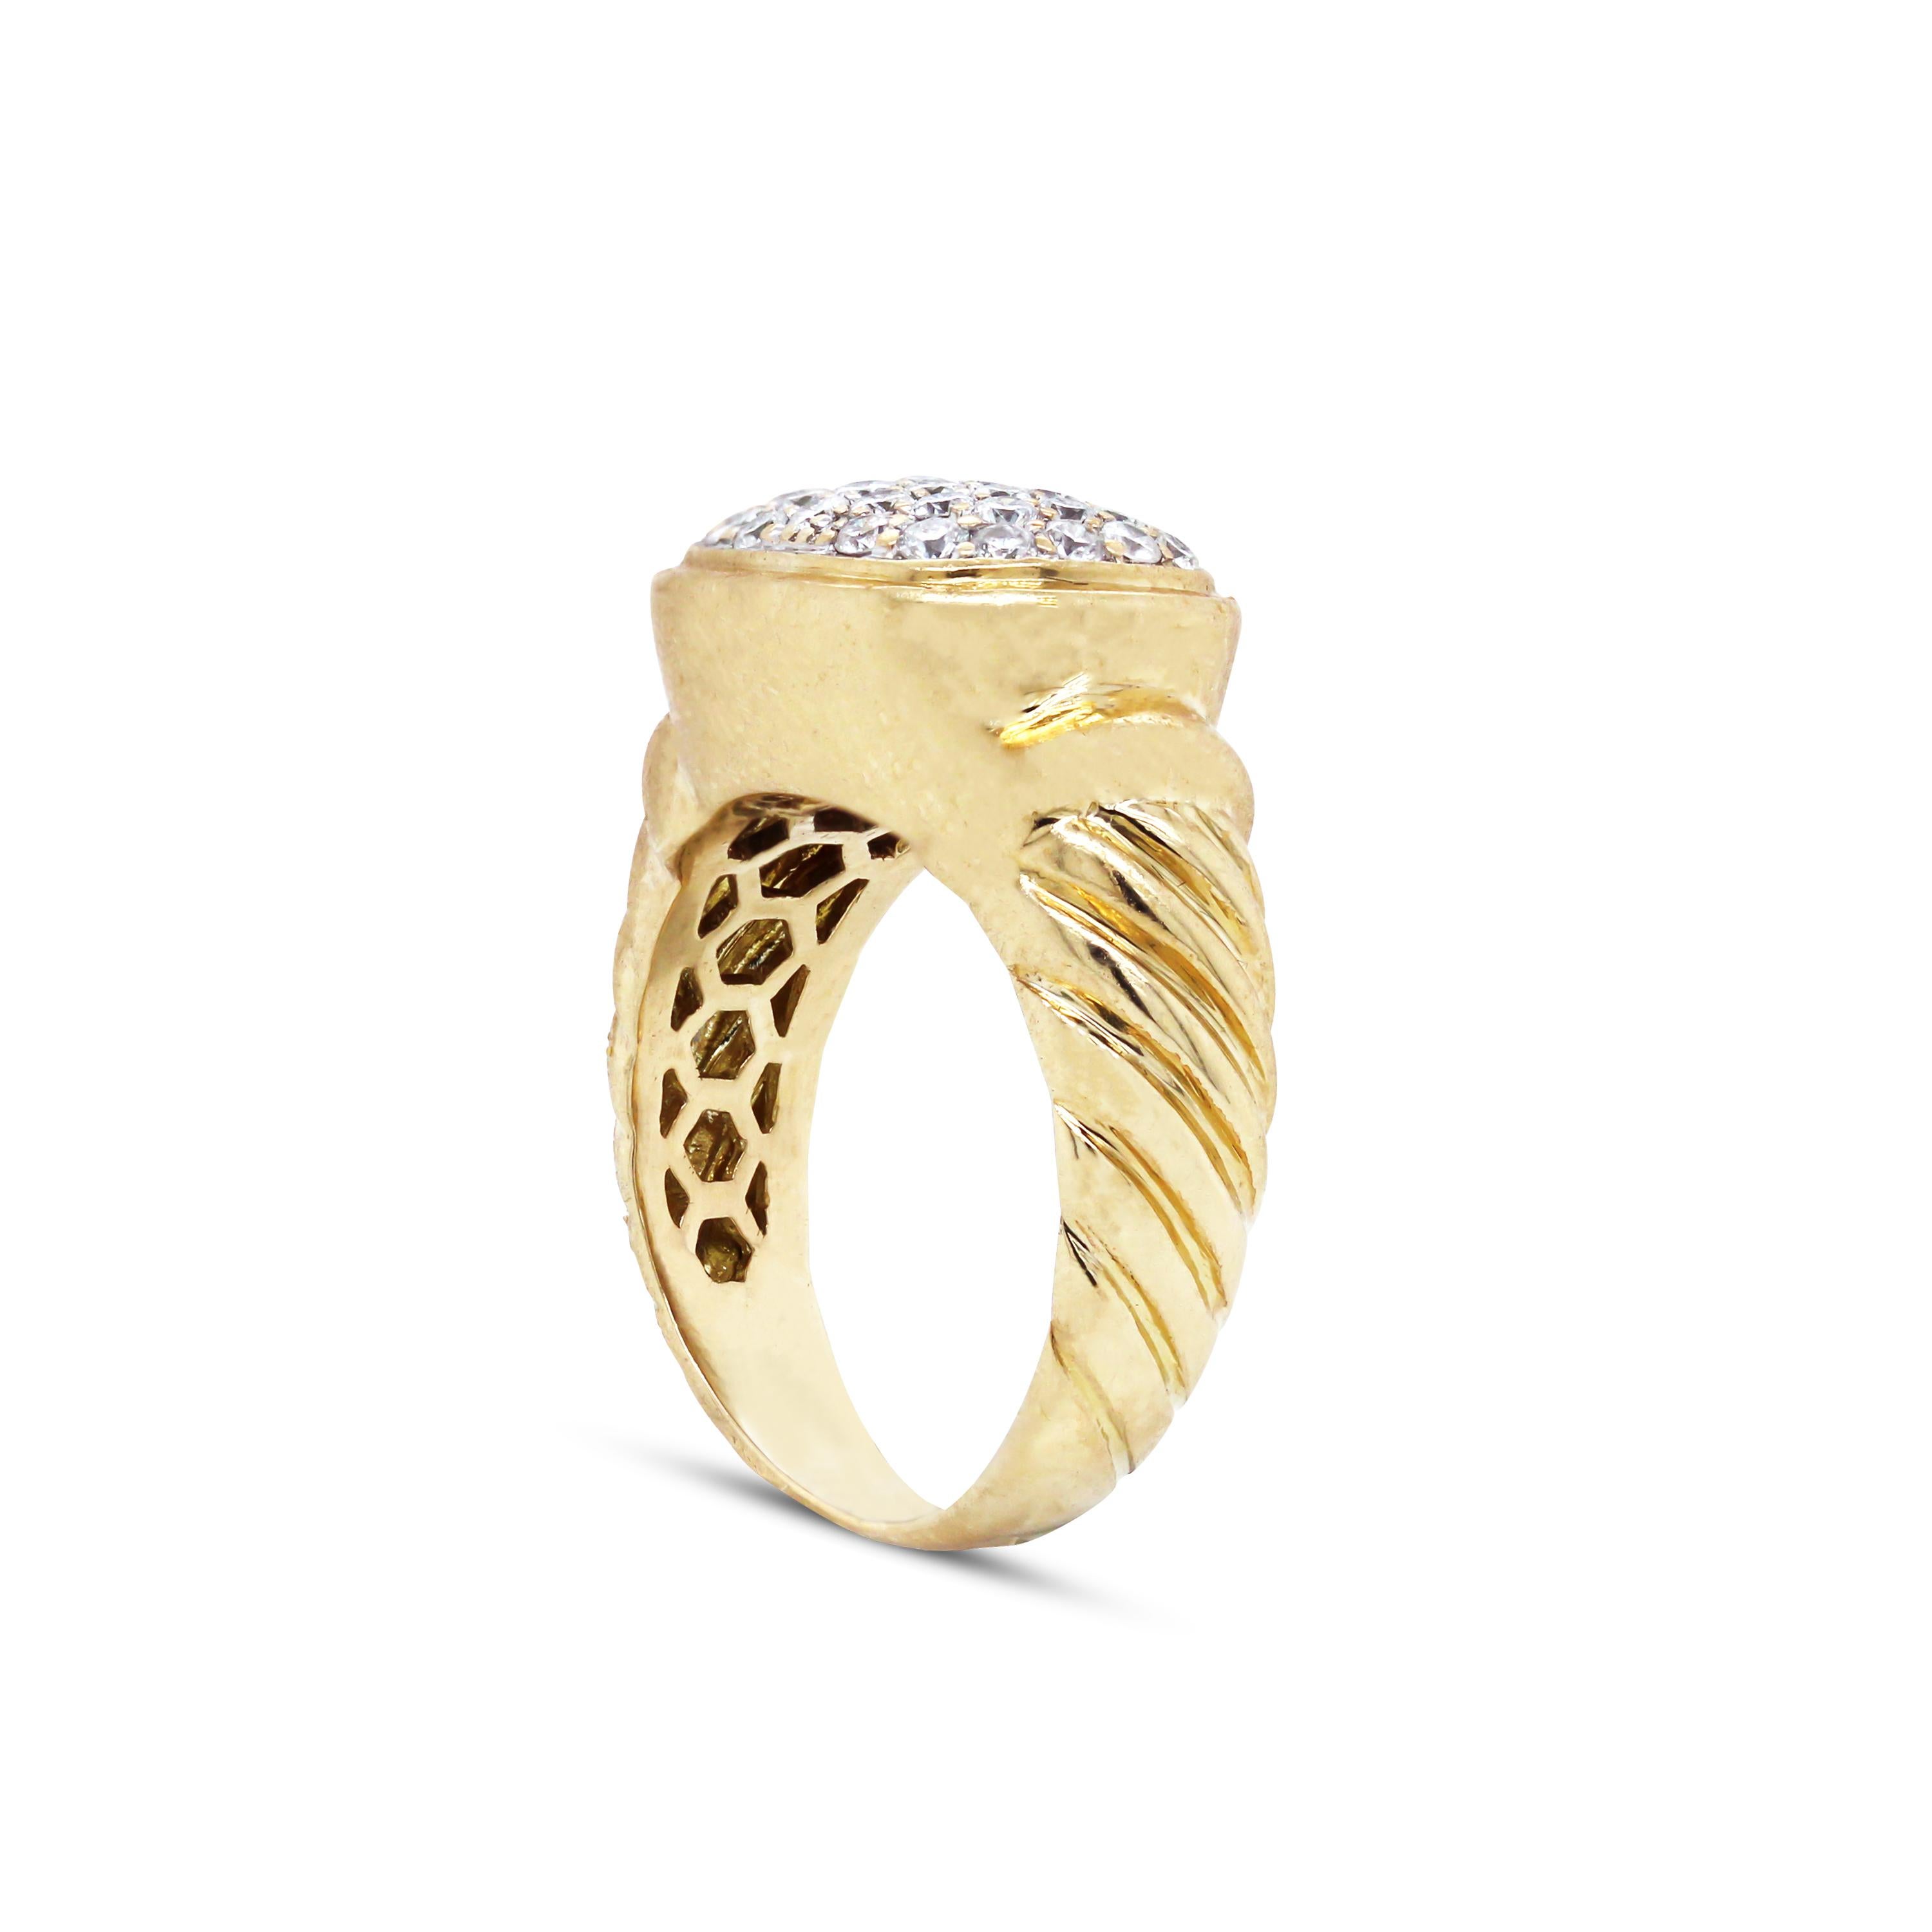 18K Yellow Gold and Diamond Cable Band Cocktail Ring

This ring features a unique cable band design on the band of the ring and pave set diamonds in the center

Apprx. 1 carat G color, VS clarity diamonds are set in the center of the ring

Ring face